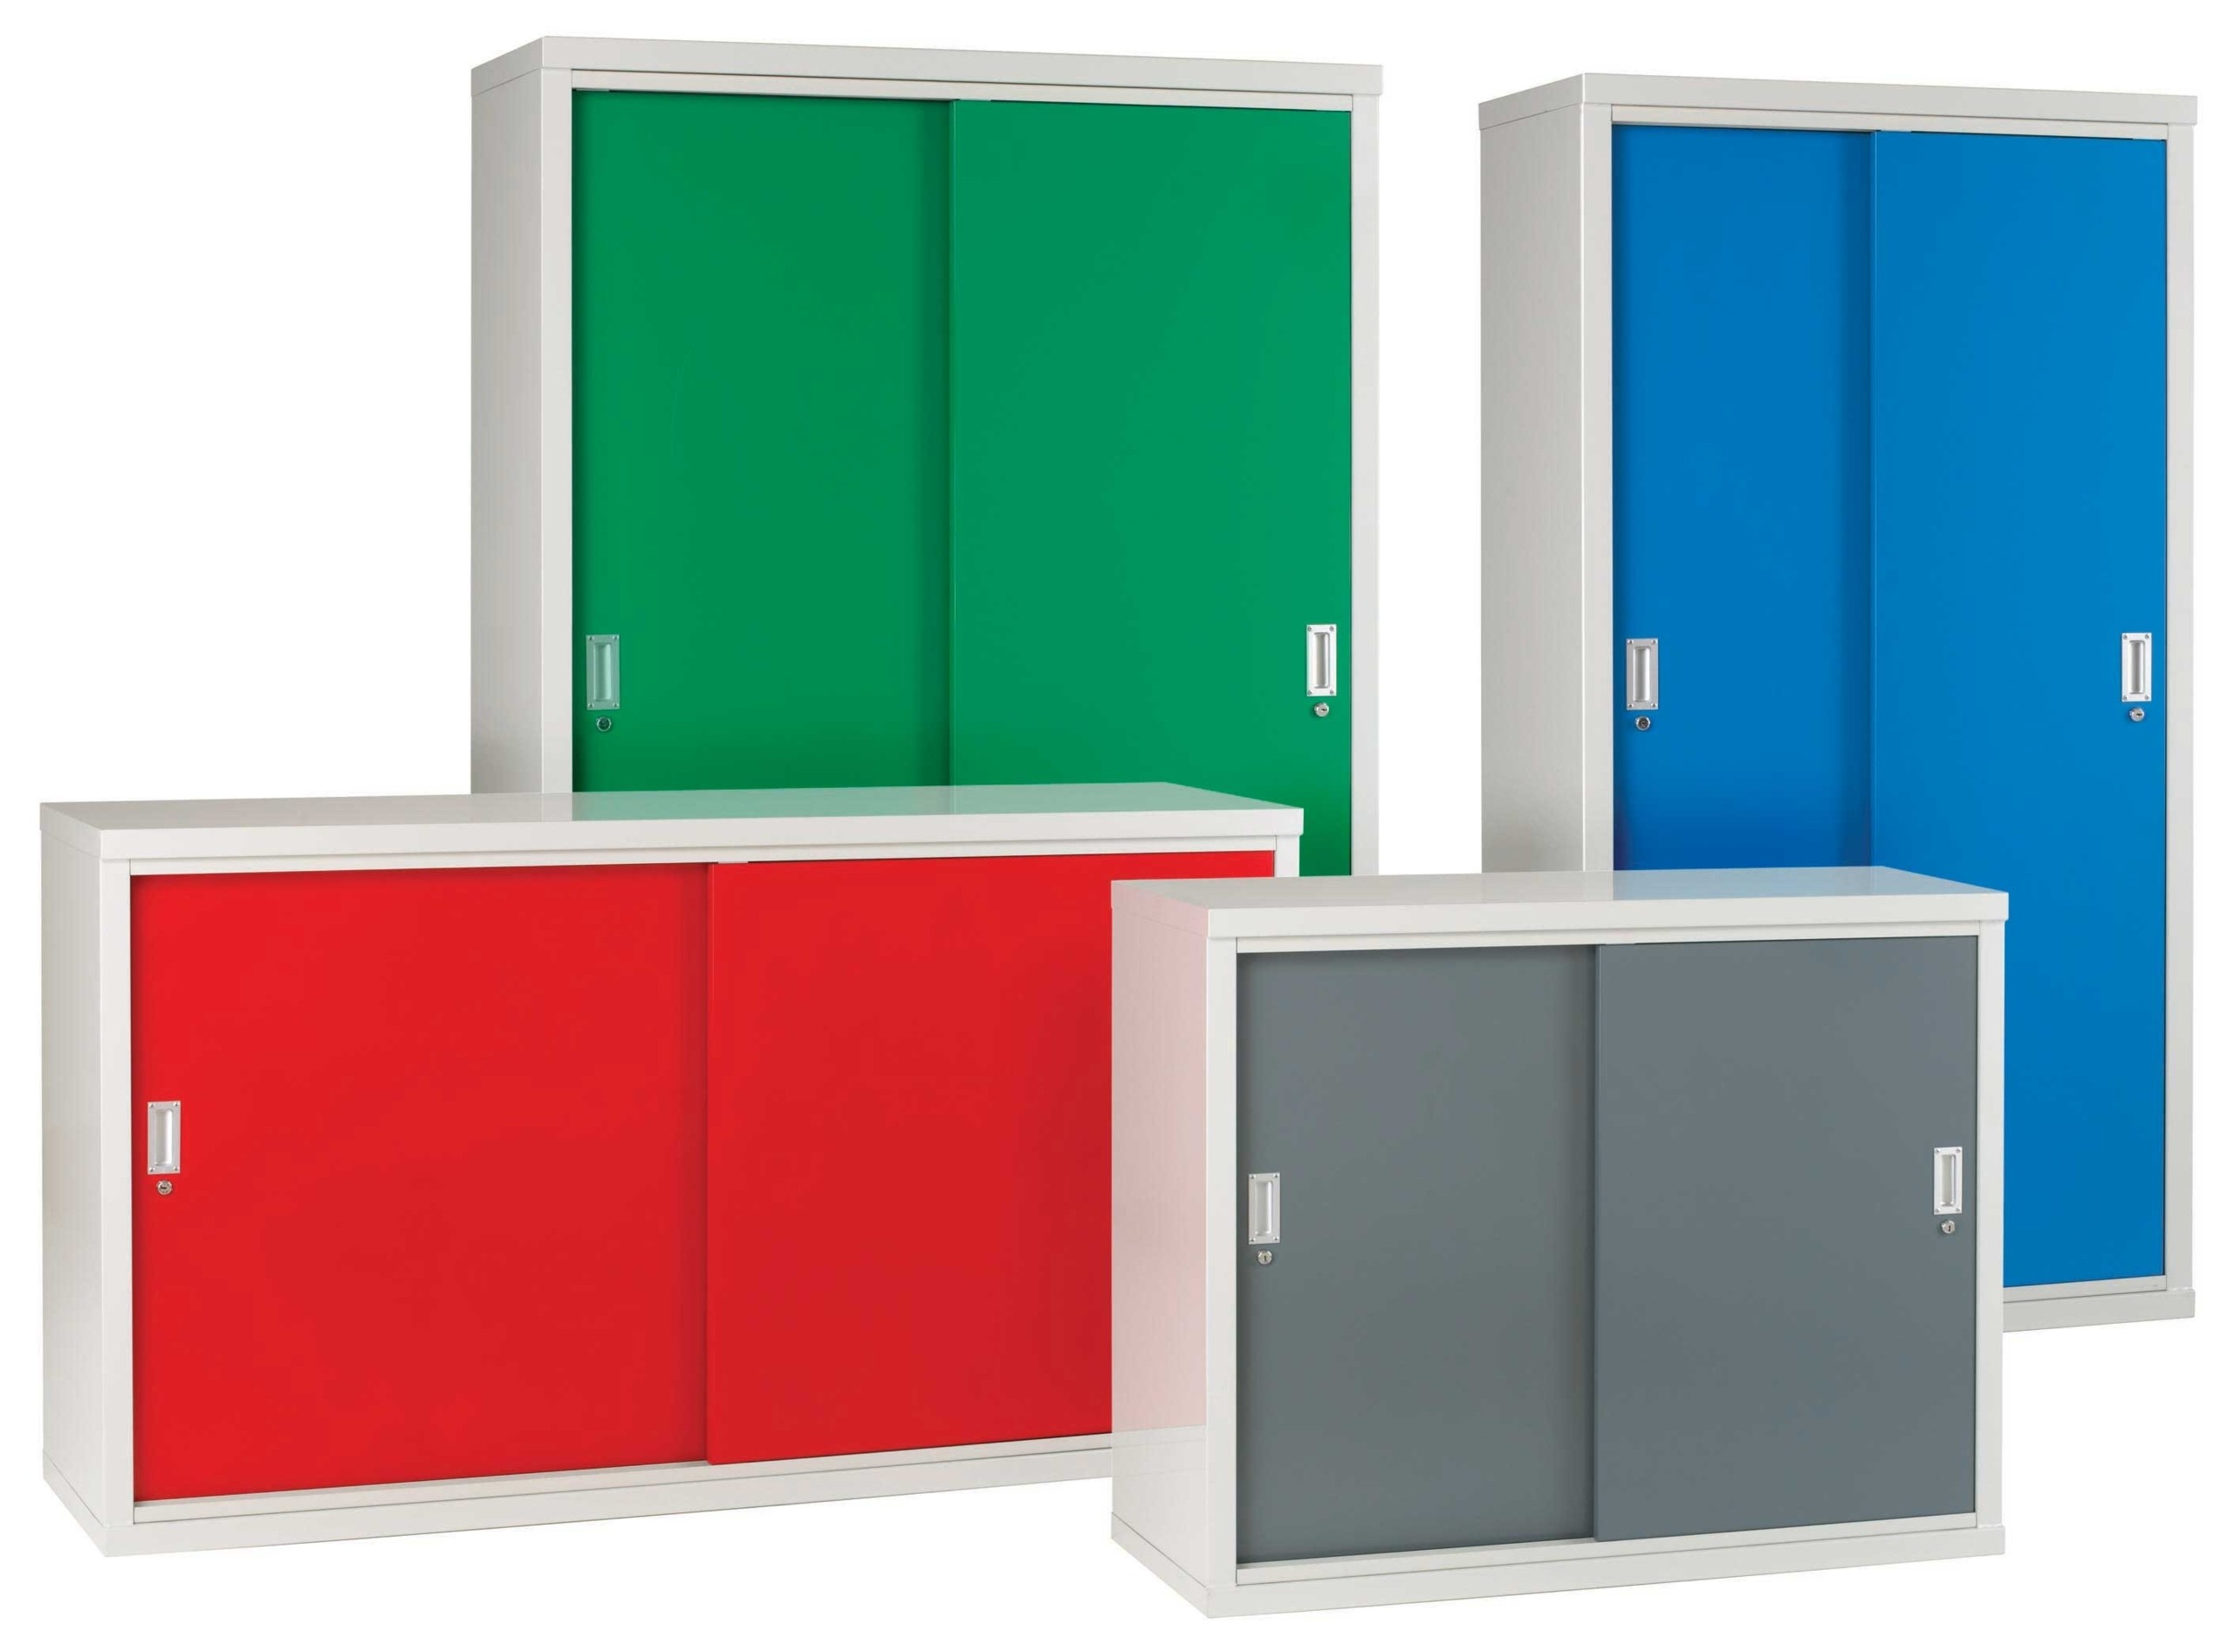 Plastic wall mounted cabinets 16